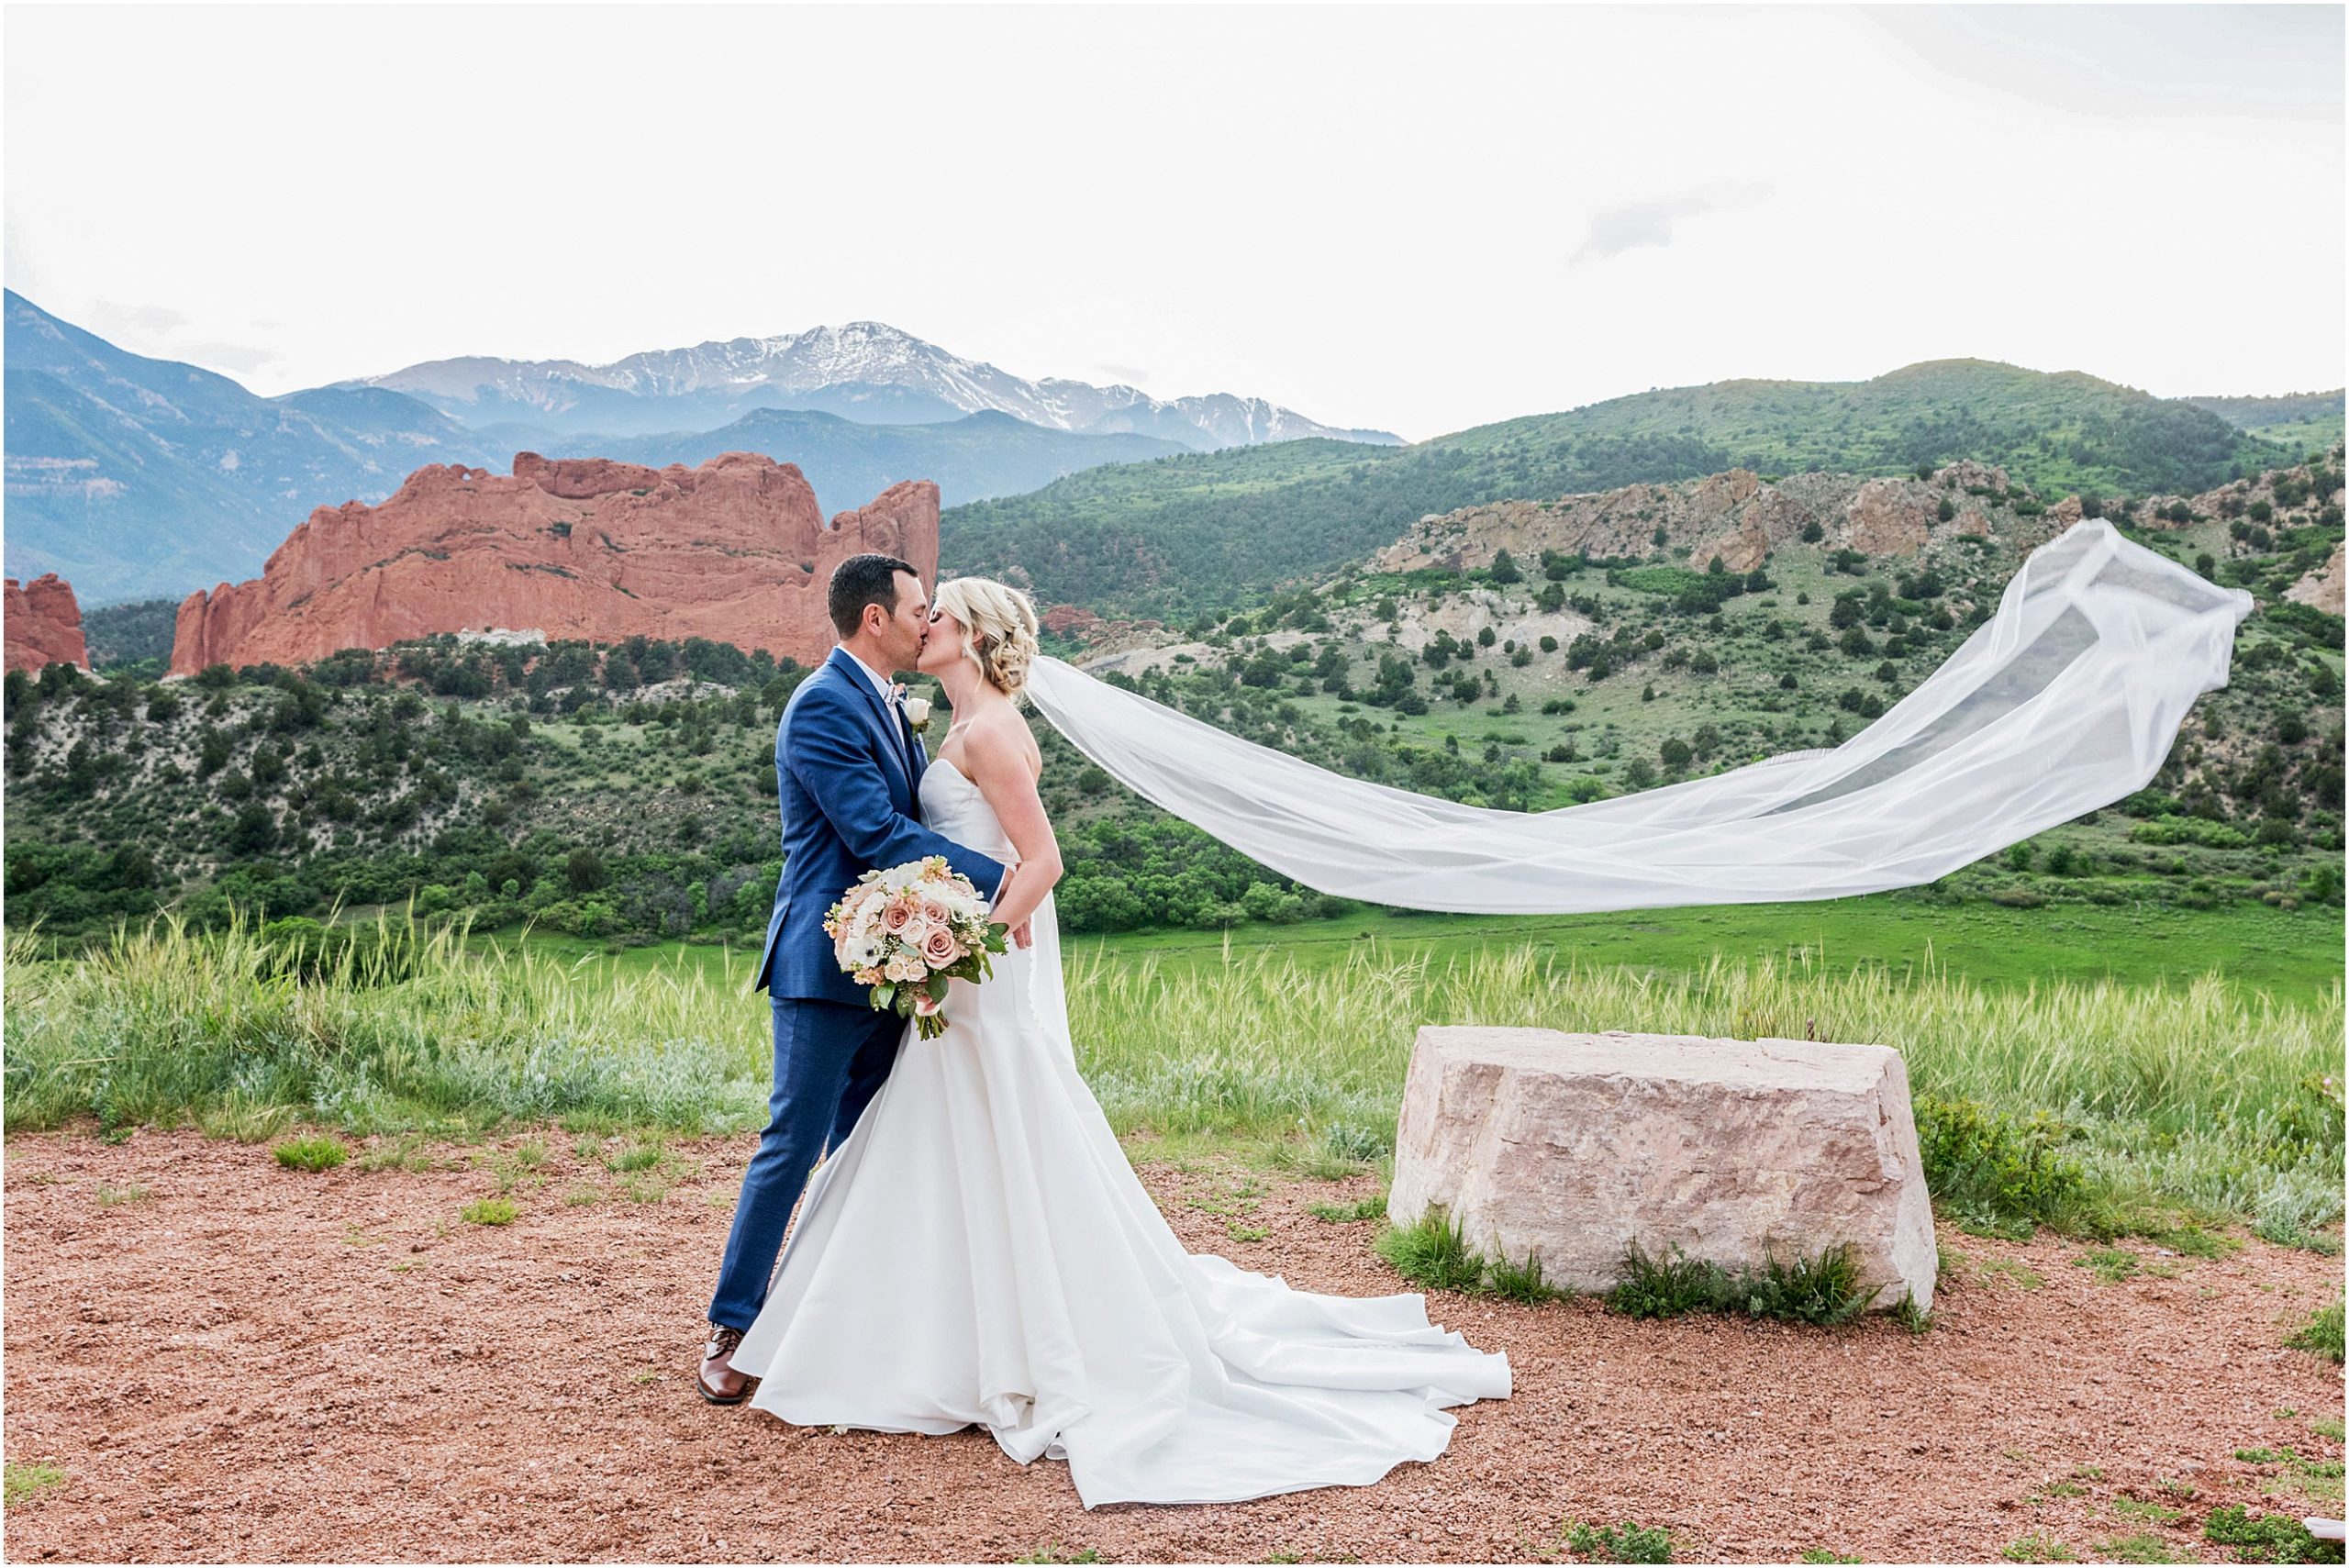 Bride and groom kiss and embrace while brides vail flies in the air with stunning mountain views